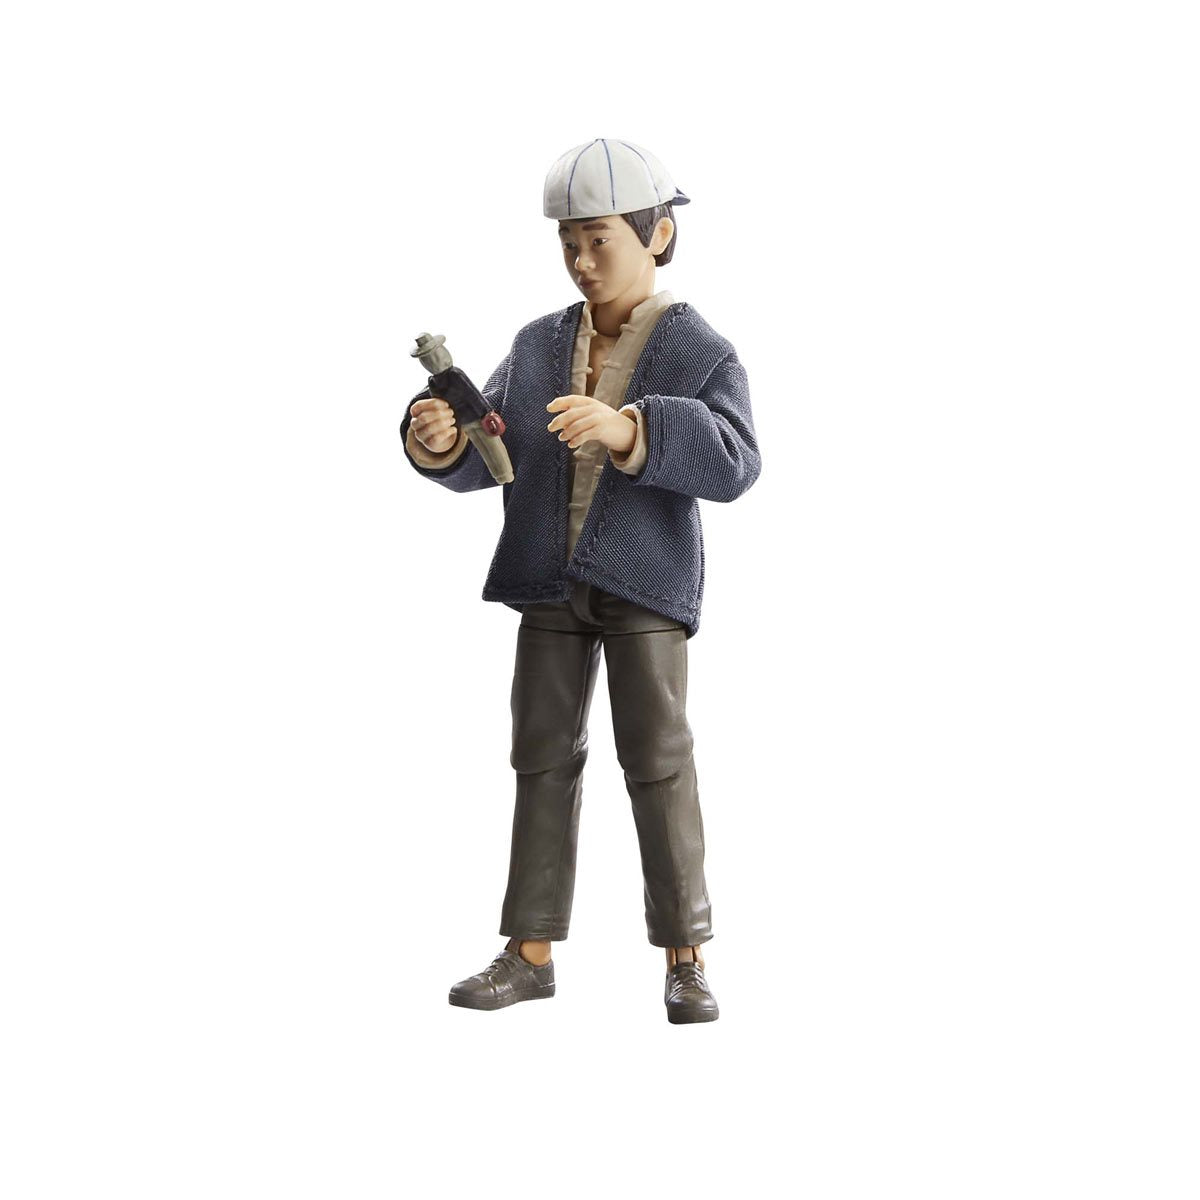 Indiana Jones and the Temple of Doom Adventure Series Short Round 6-inch Action Figure - Heretoserveyou